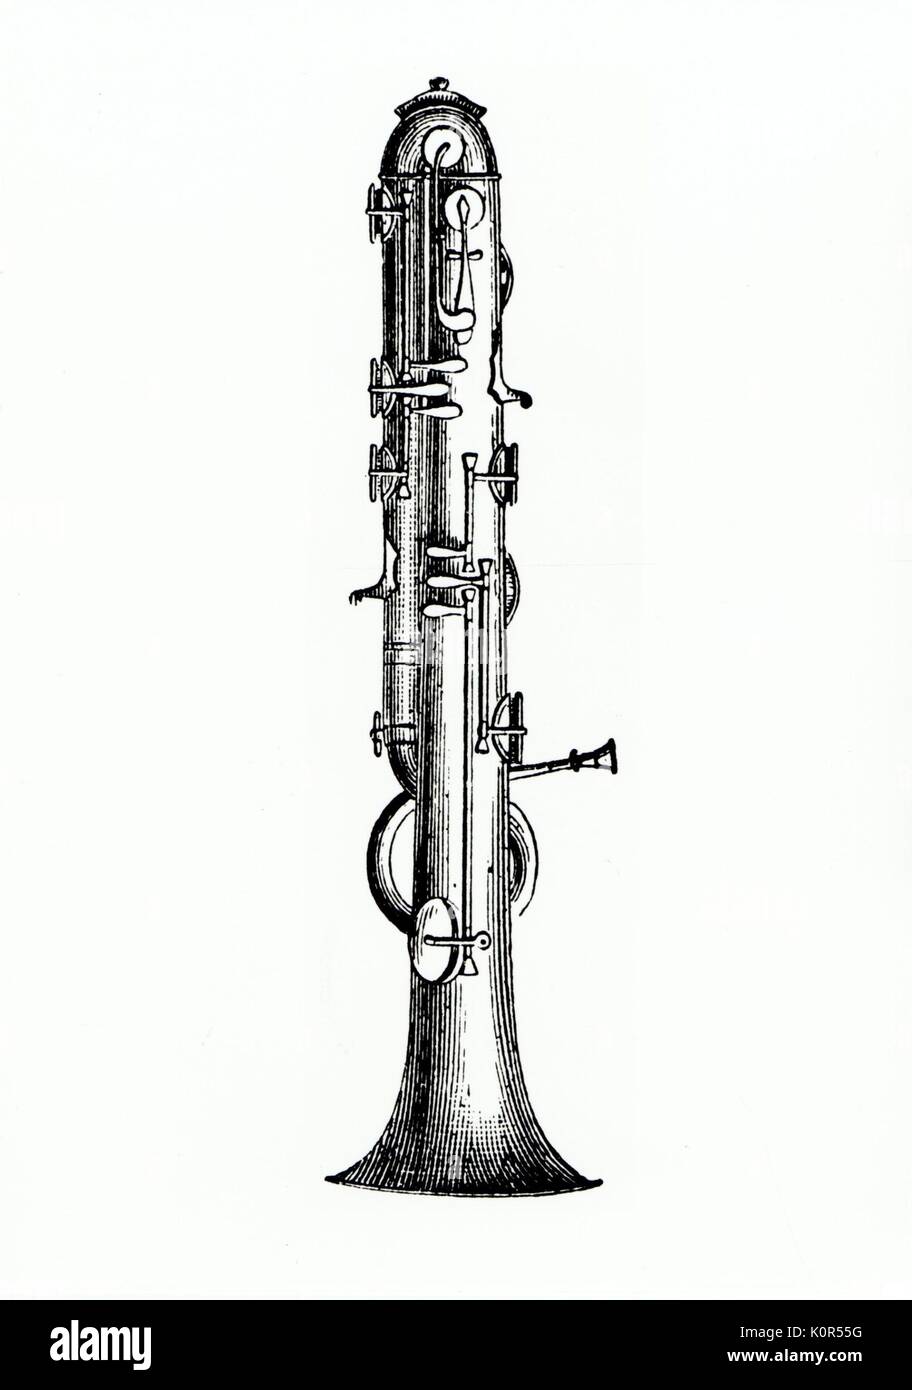 Instruments - brass - Ophicleide Bass brass instrument. Patented by Halary in Paris in 1821. Superseded by bass tuba. Stock Photo